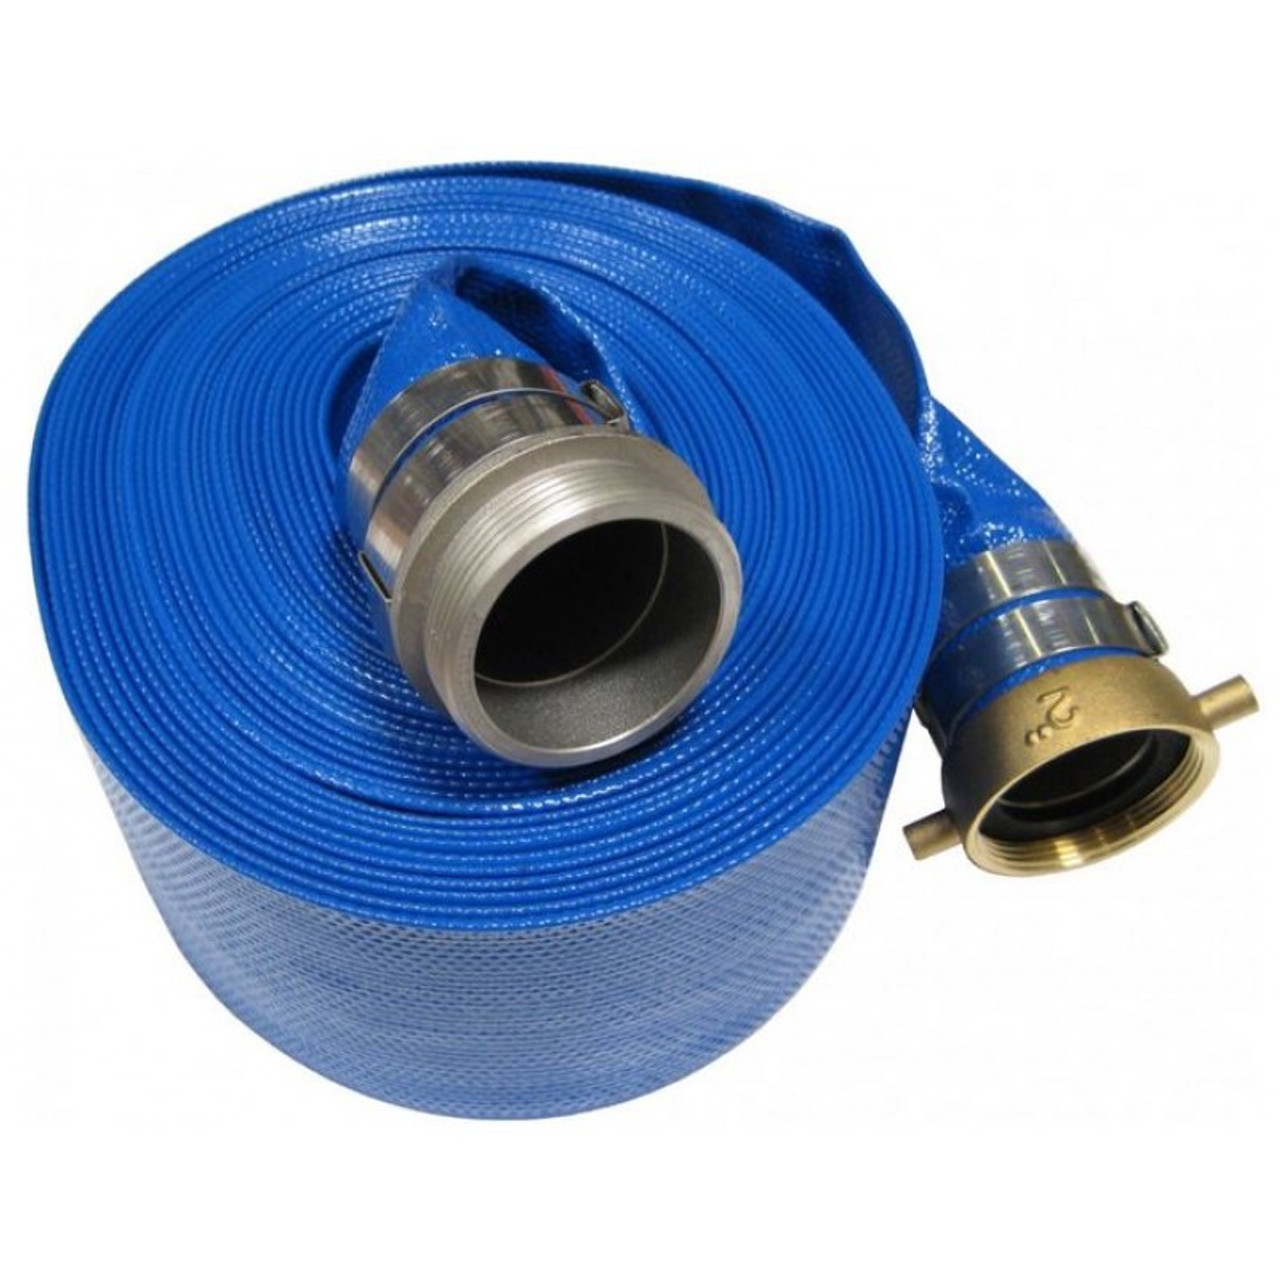 Selecting the right hose